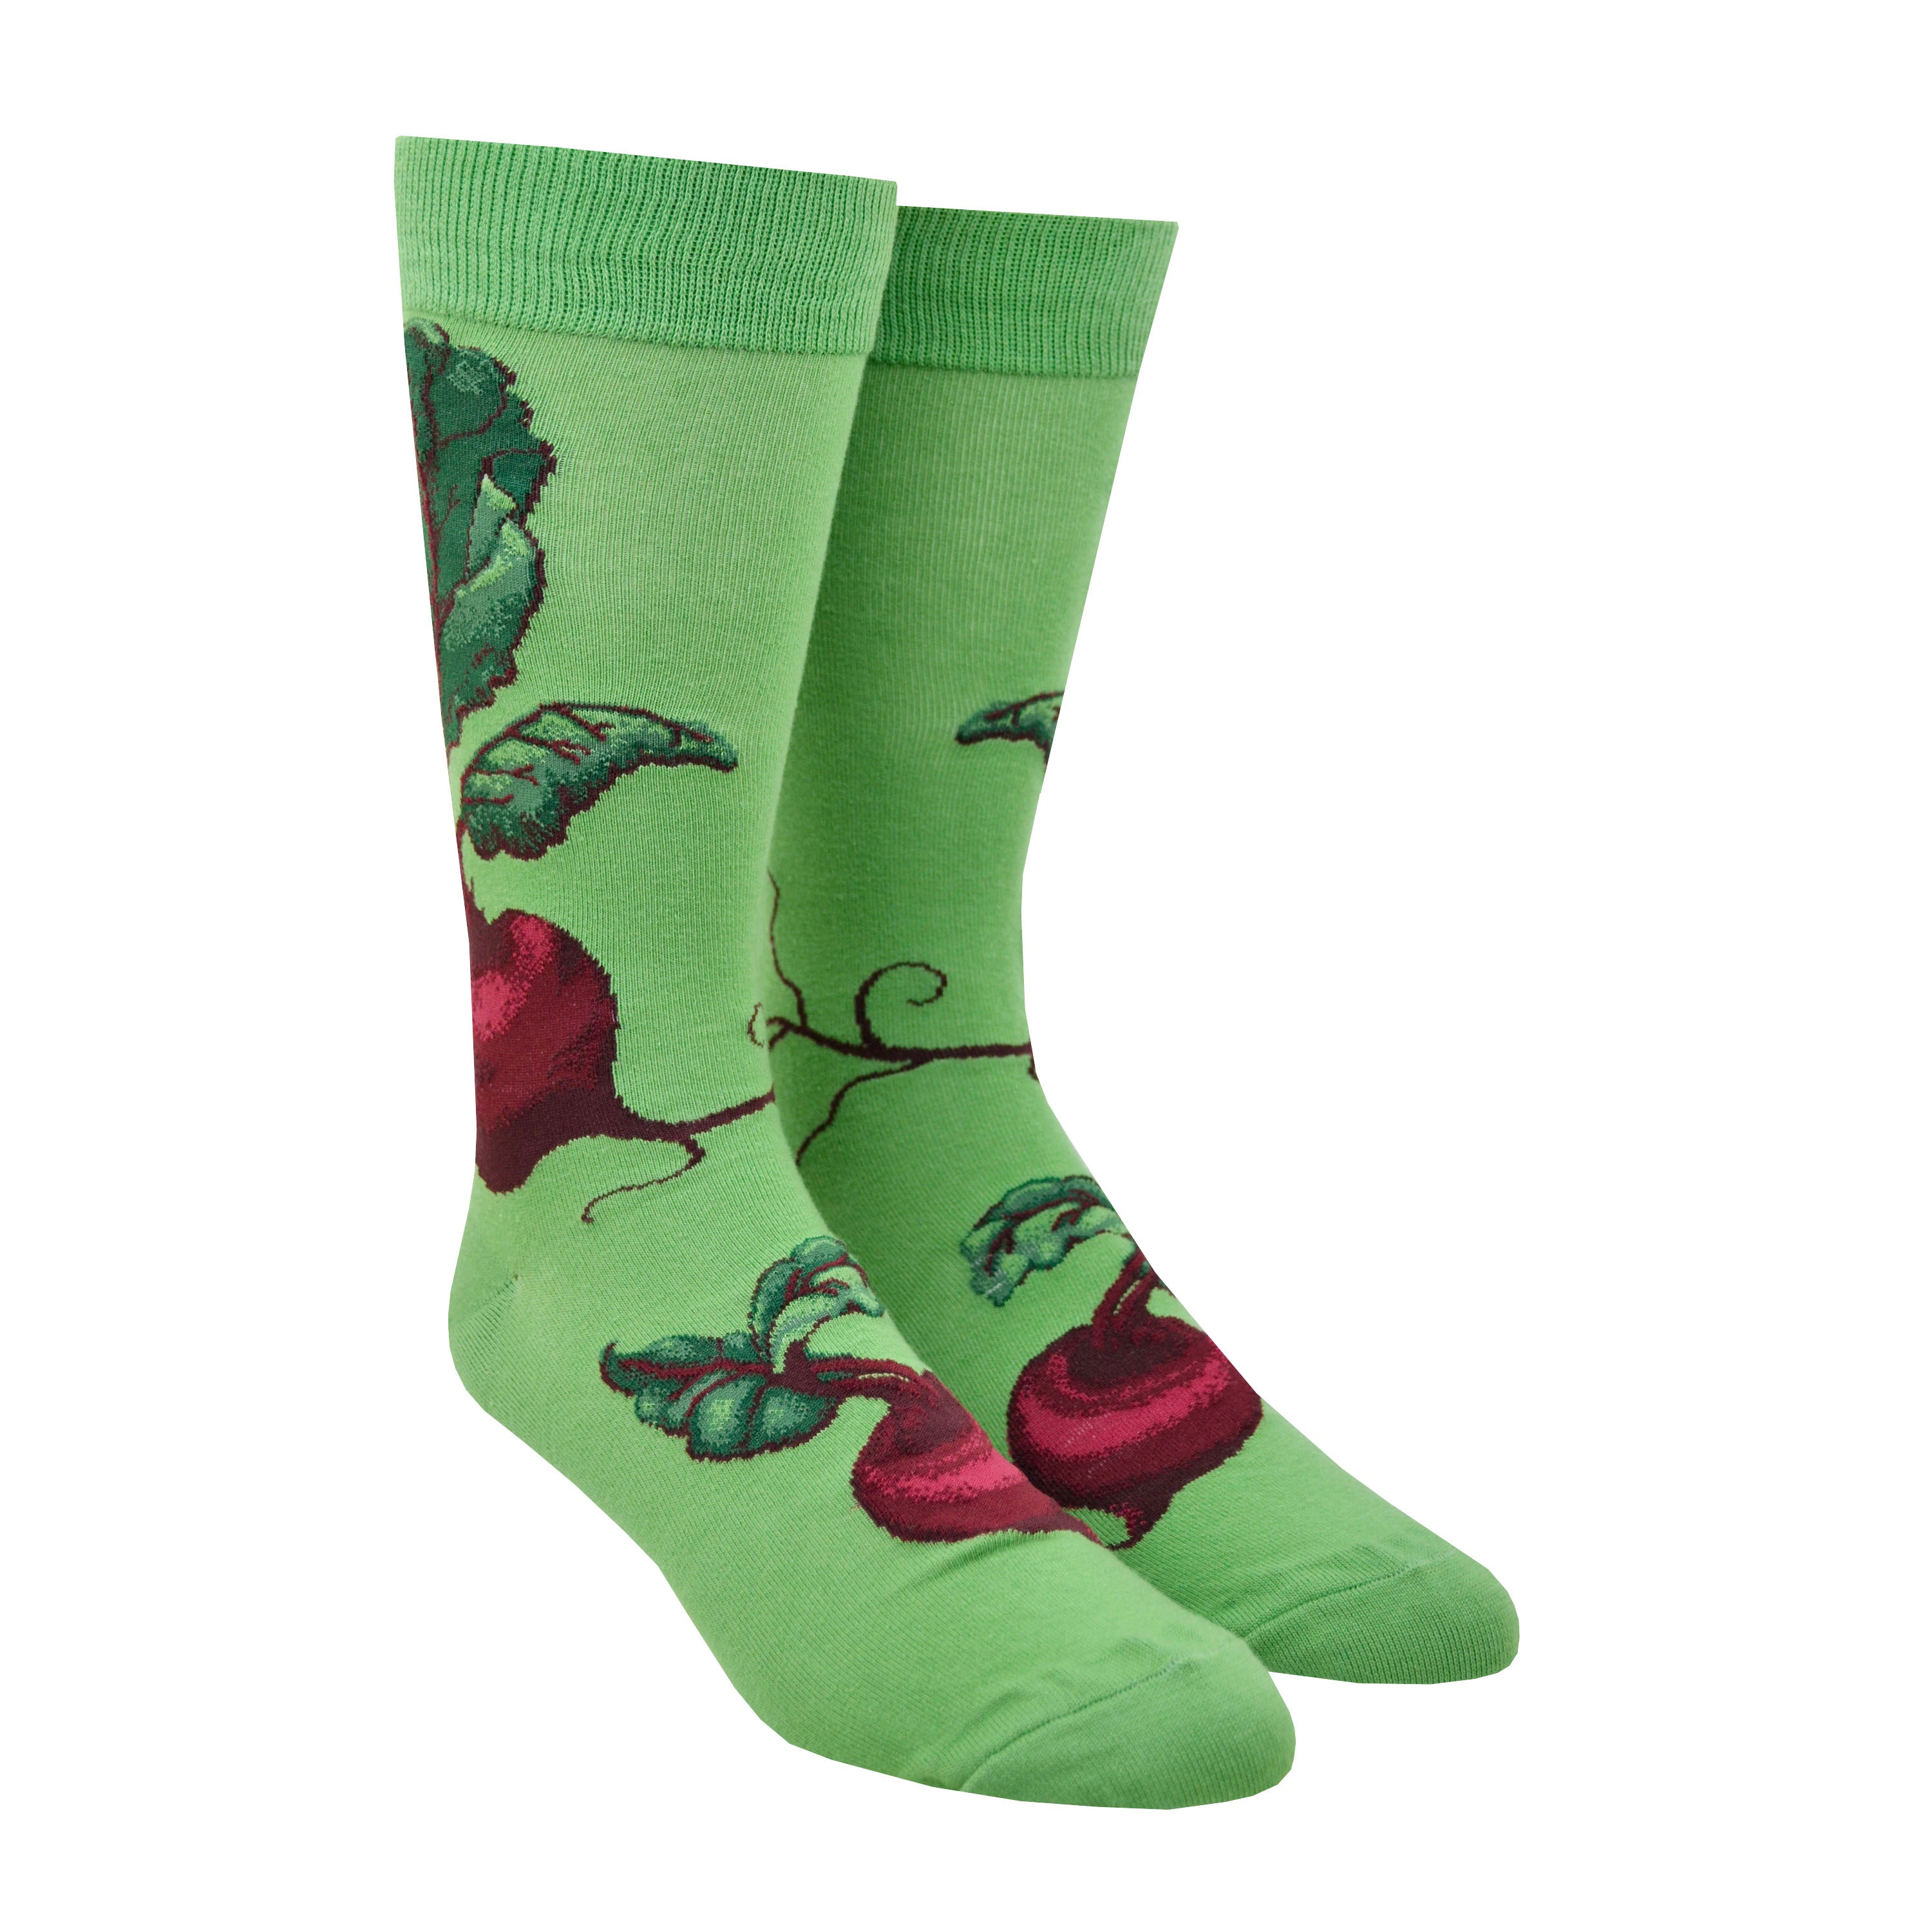 Shown on a foot form, a pair of Mod Socks’ green cotton men's crew socks with large, uprooted beetroot plant